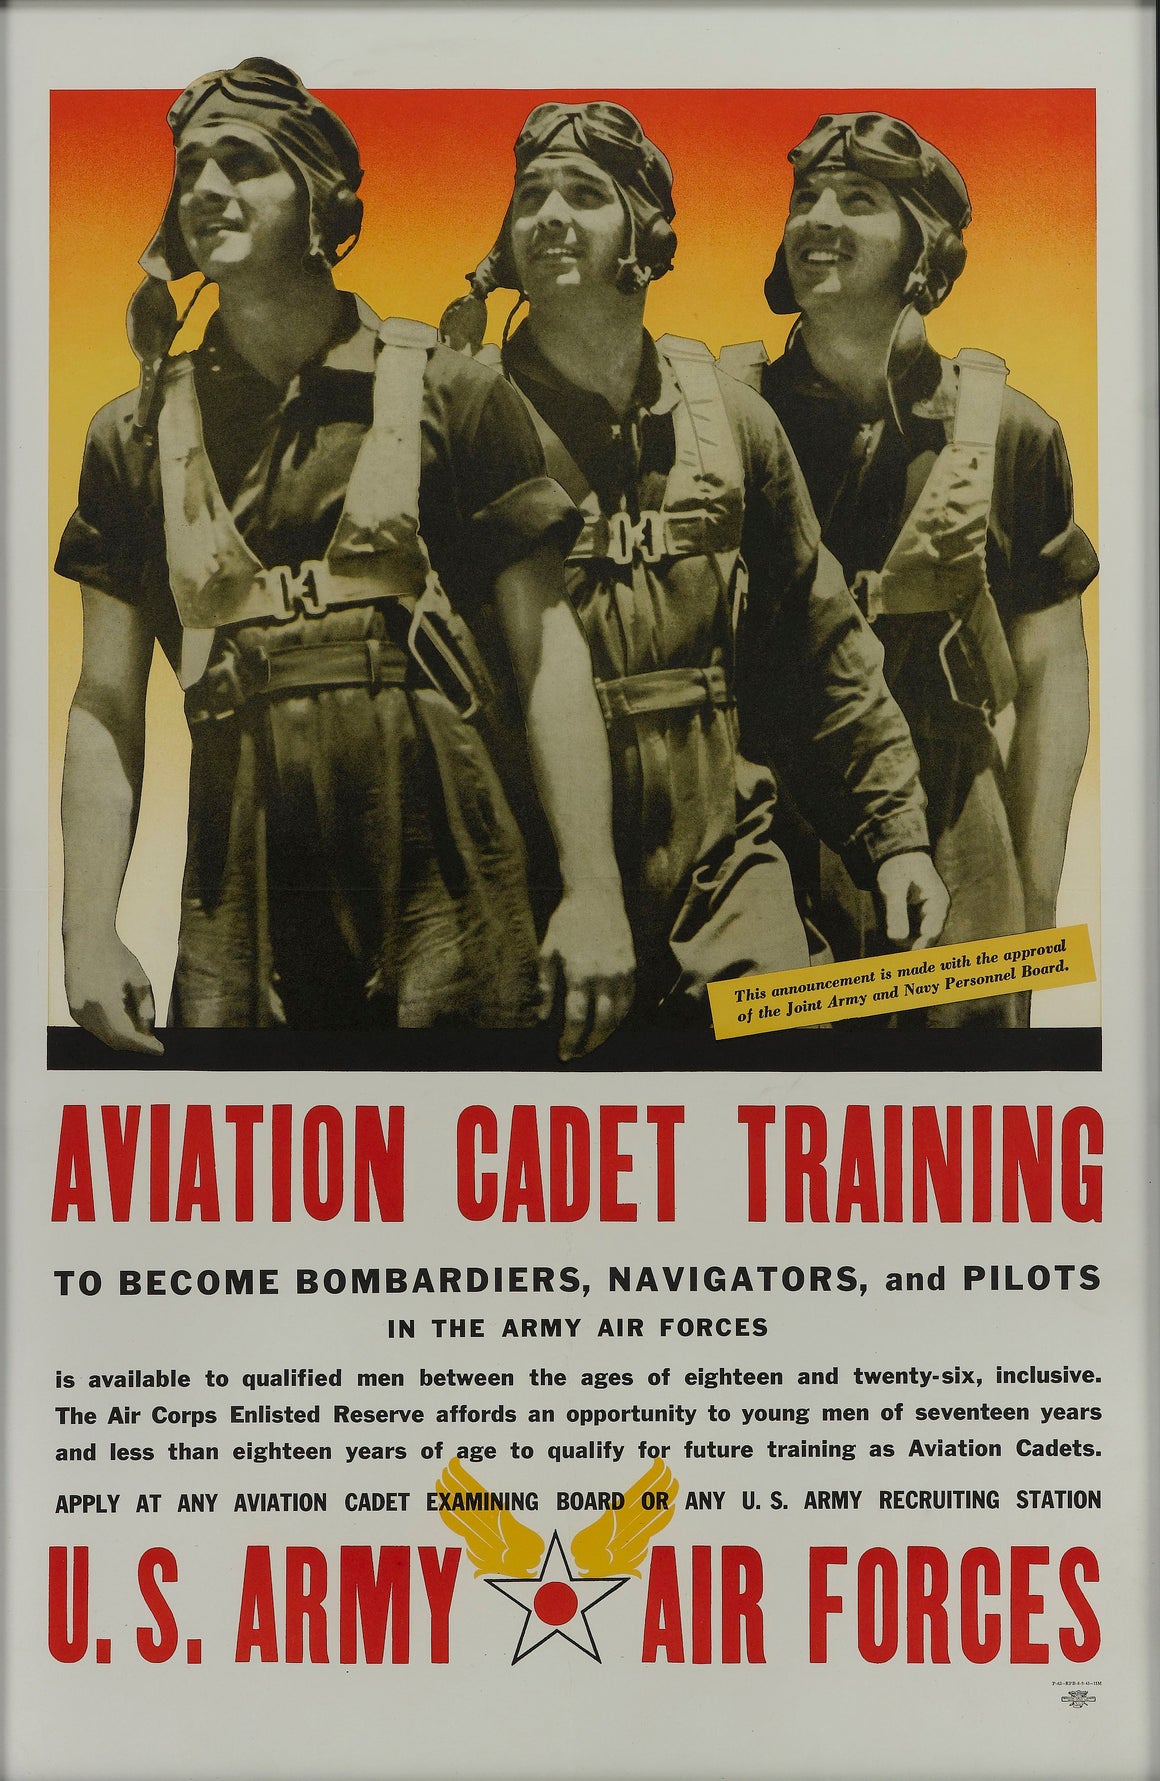 "Aviation Cadet Training, U.S. Army Air Force" Vintage WWII Recruitment Poster, 1943